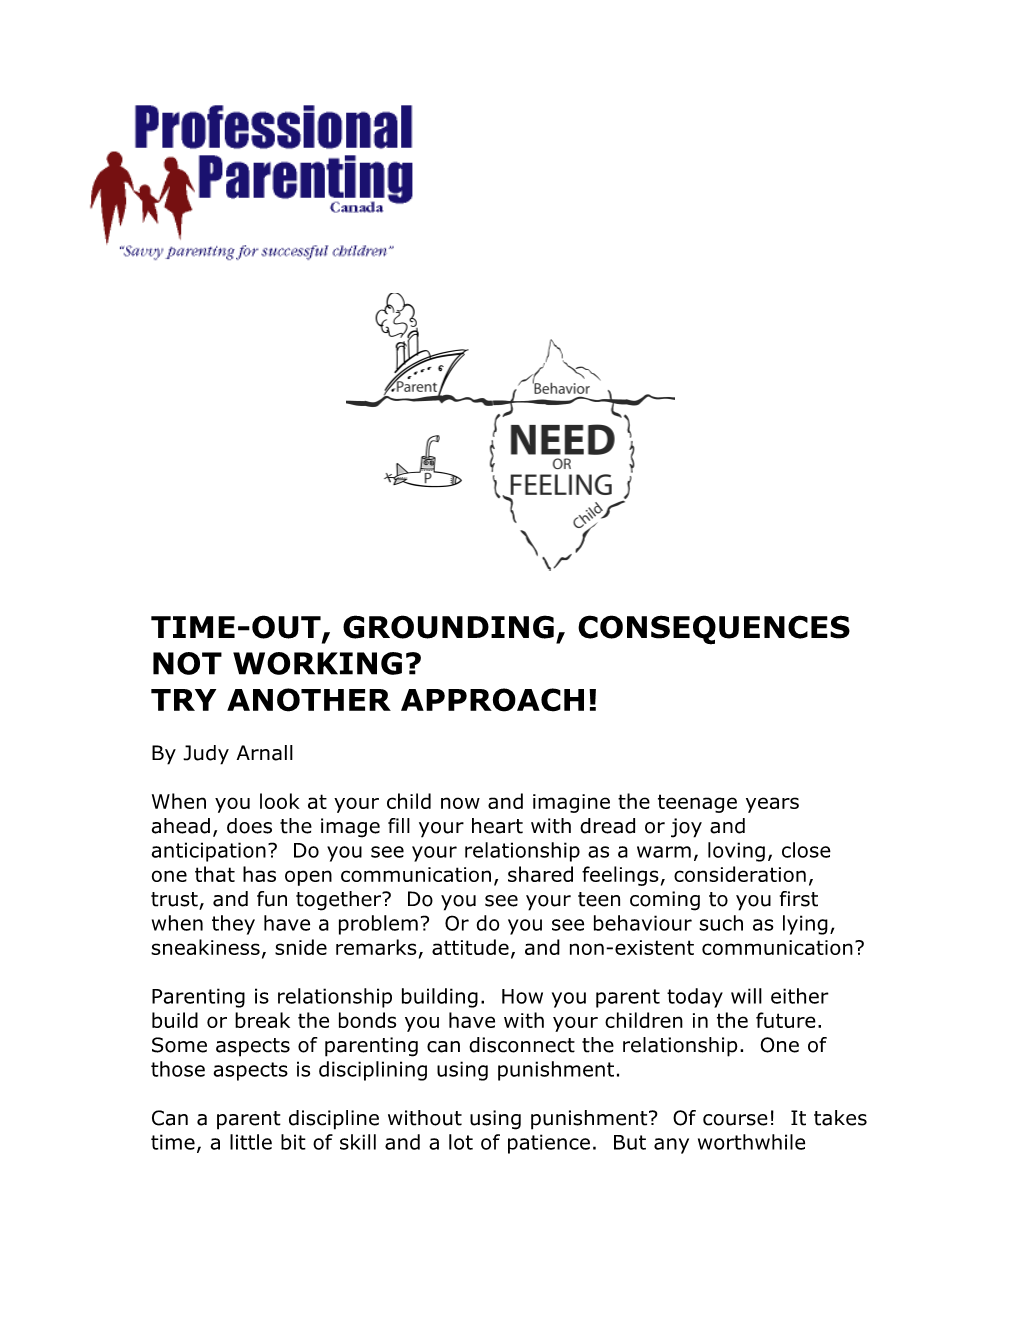 Time-Out, Grounding, Consequences Not Working